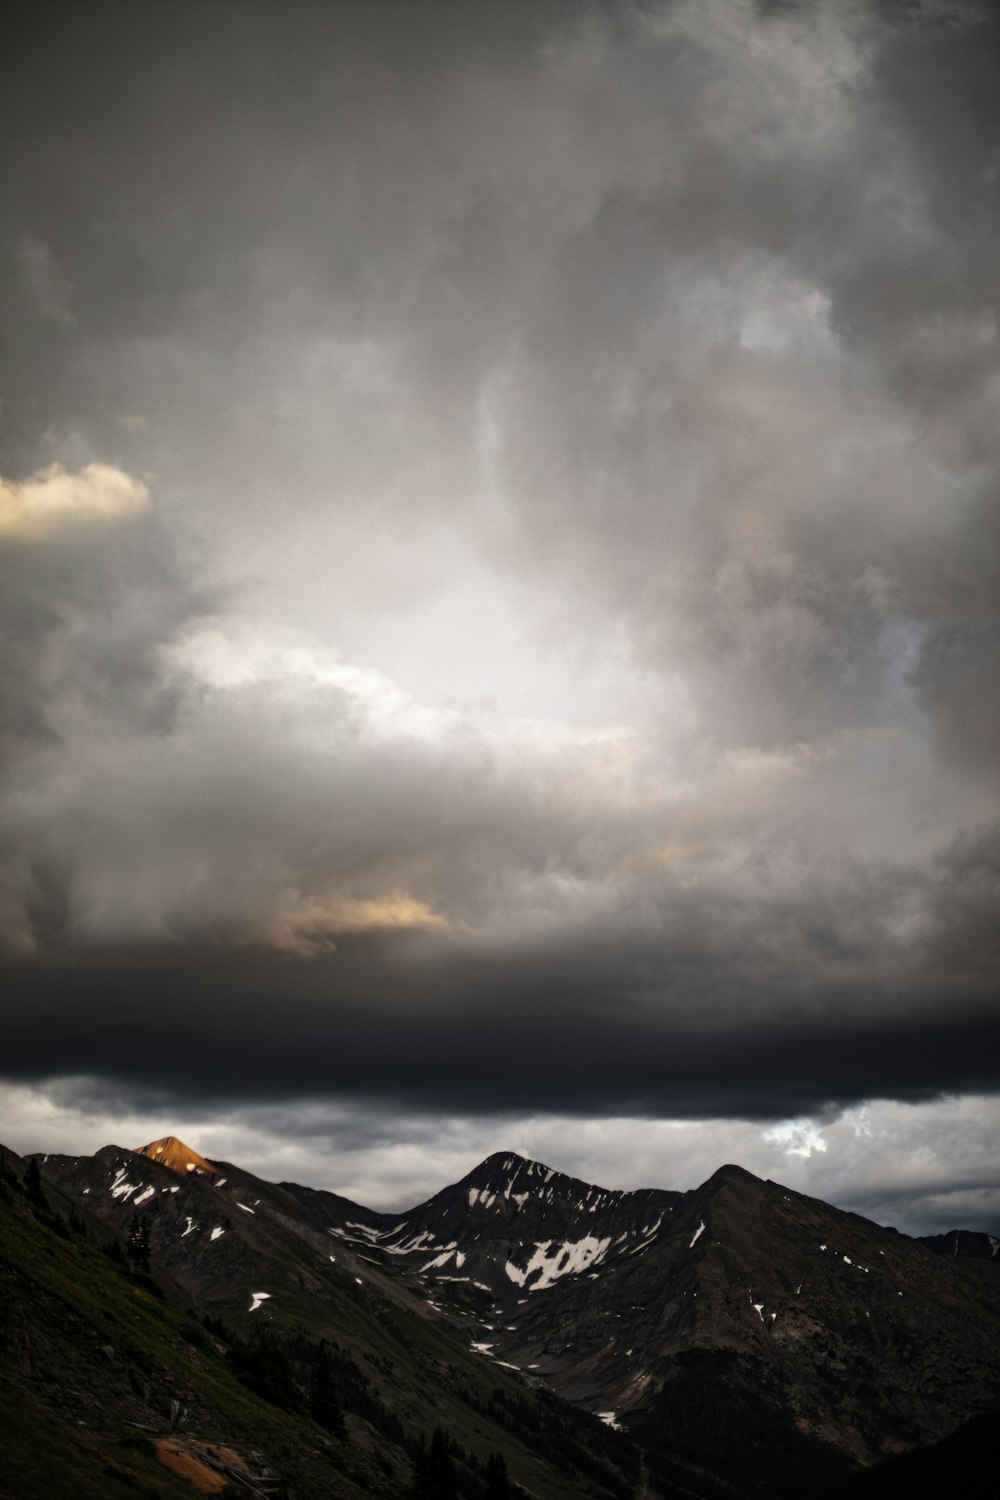 a mountain range under a cloudy sky with mountains in the background